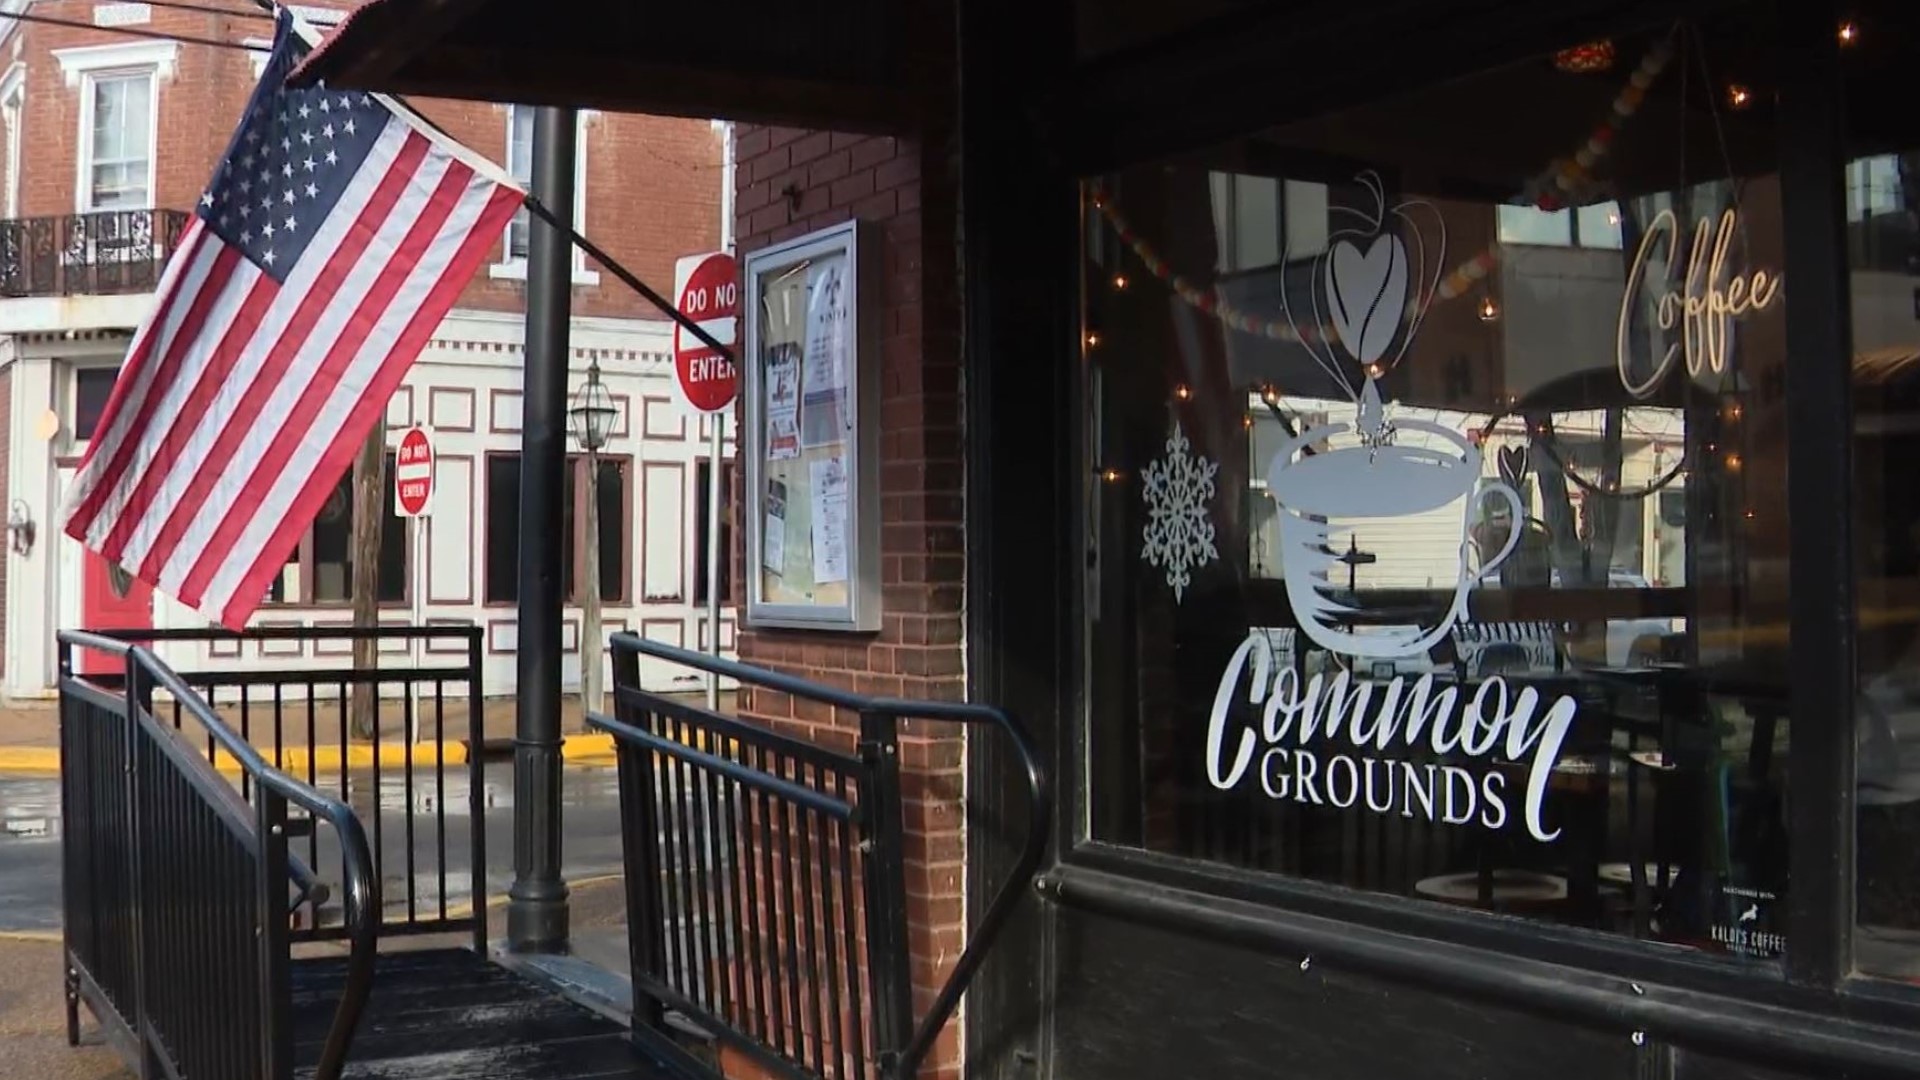 Welcome to Common Grounds, a coffee shop where something unique is brewing. The shop opened in 2019 with the specific intention of hiring workers with special needs.